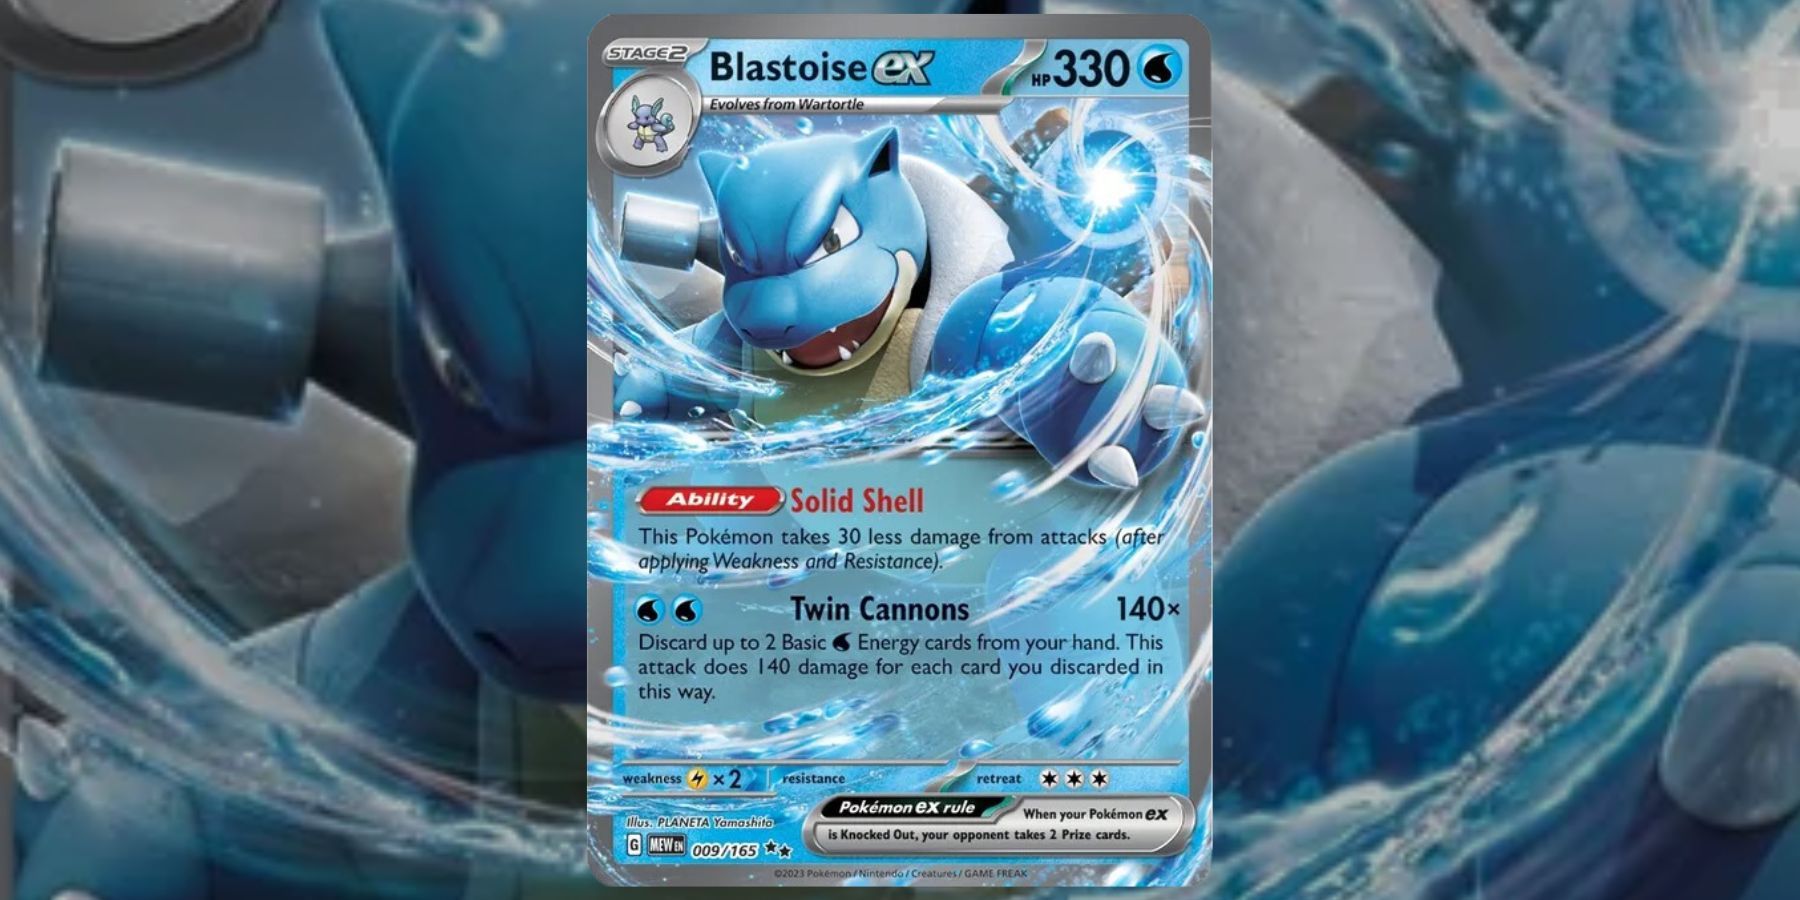 10 Most Expensive Pokémon 151 Cards (& How Much They’re Worth)